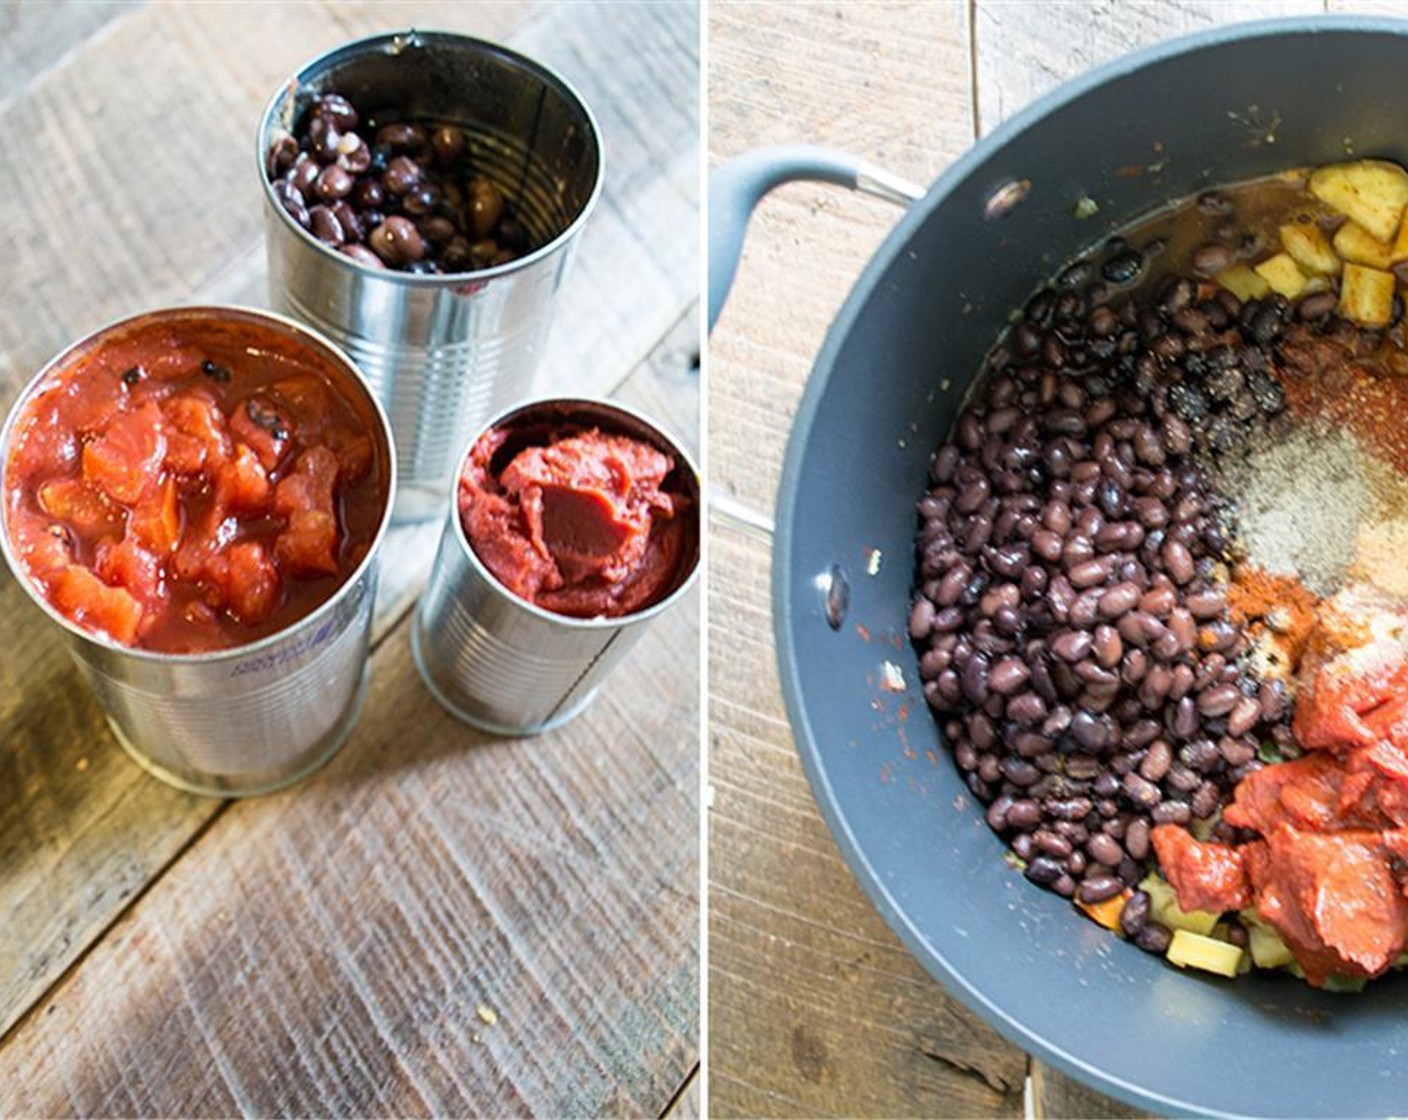 step 2 Reduce heat to medium low, add Black Beans (2 cans), Fire Roasted Diced Tomatoes (1 can), Tomato Paste (1 can), Low-Sodium Vegetable Broth (1 1/2 cups), Chili Powder (2 Tbsp), Ground Cumin (1/2 Tbsp), McCormick® Garlic Powder (1 tsp), Sea Salt (1 tsp), Ground Black Pepper (1/2 tsp), and Cayenne Pepper (1/4 tsp). Stir to combine well.